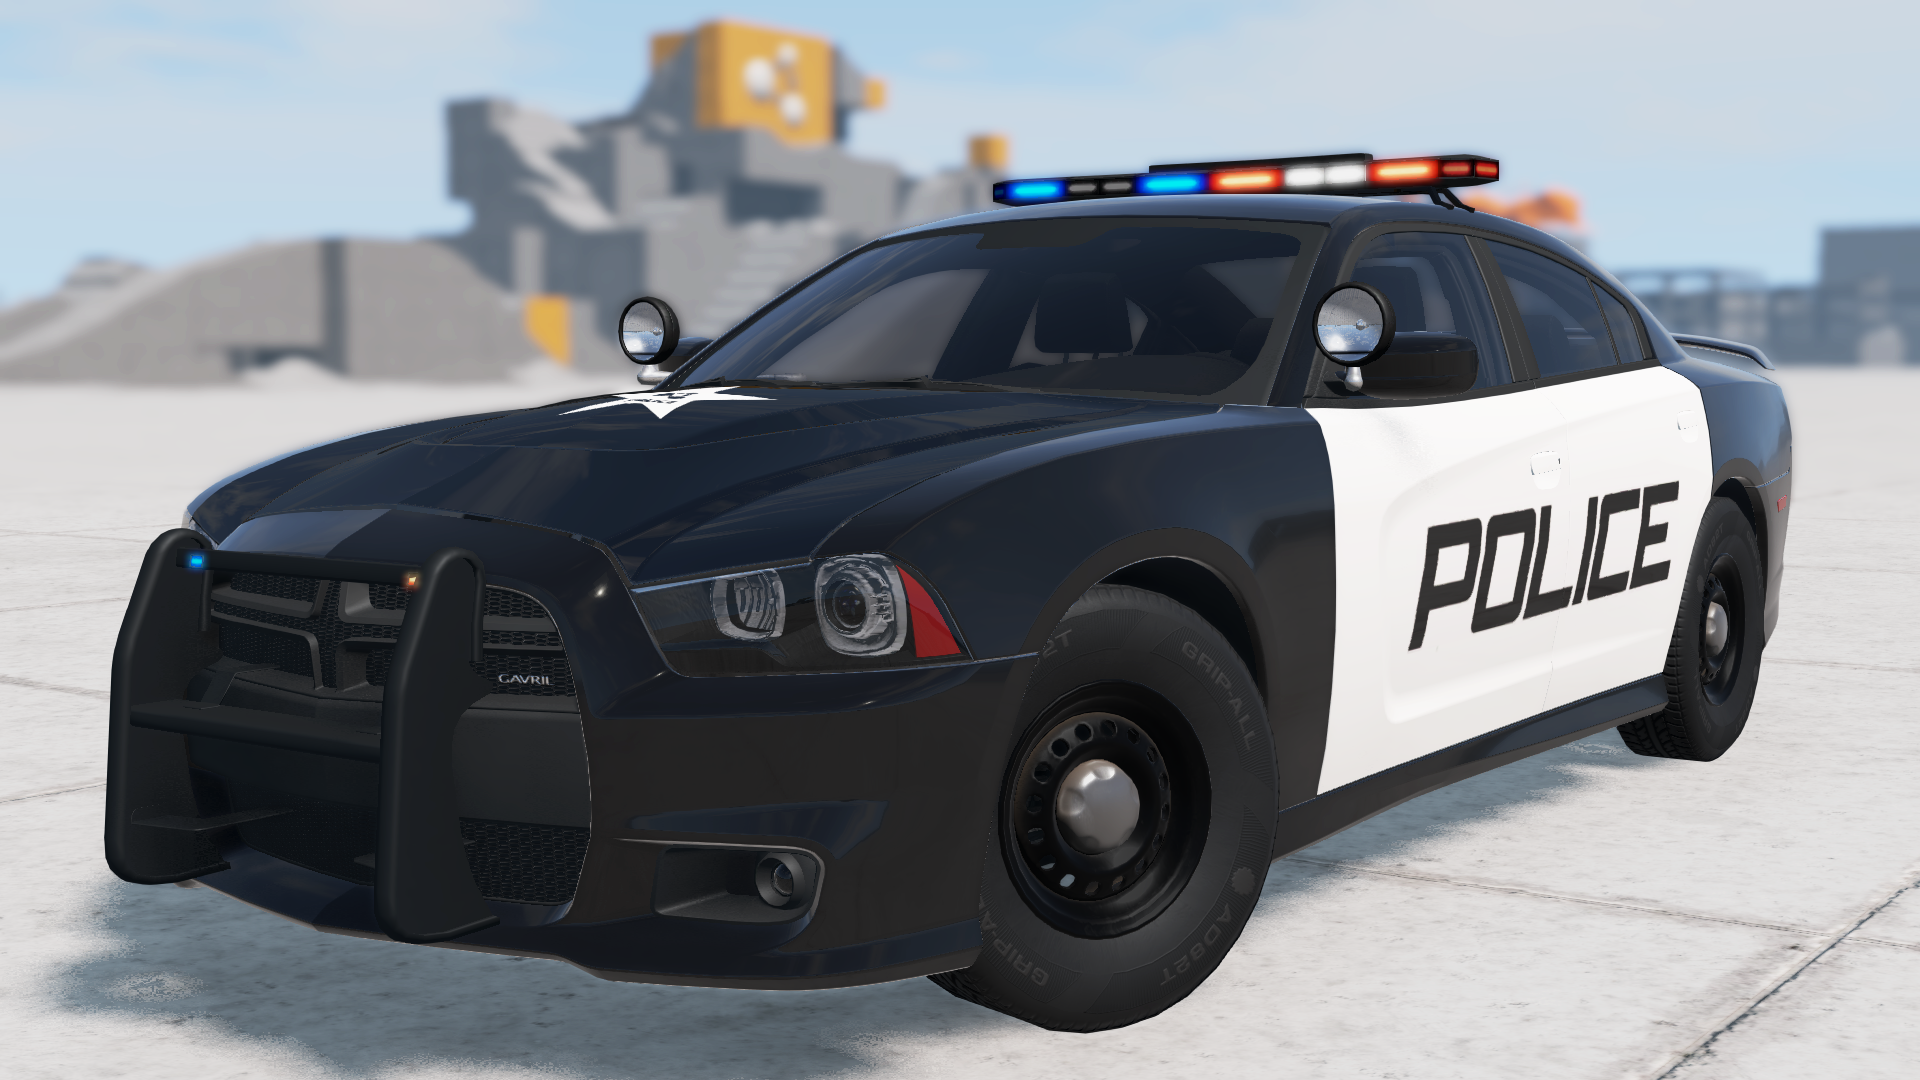 Released - 2012 Dodge Charger (Gavril Grand Marshal) Revamped | BeamNG